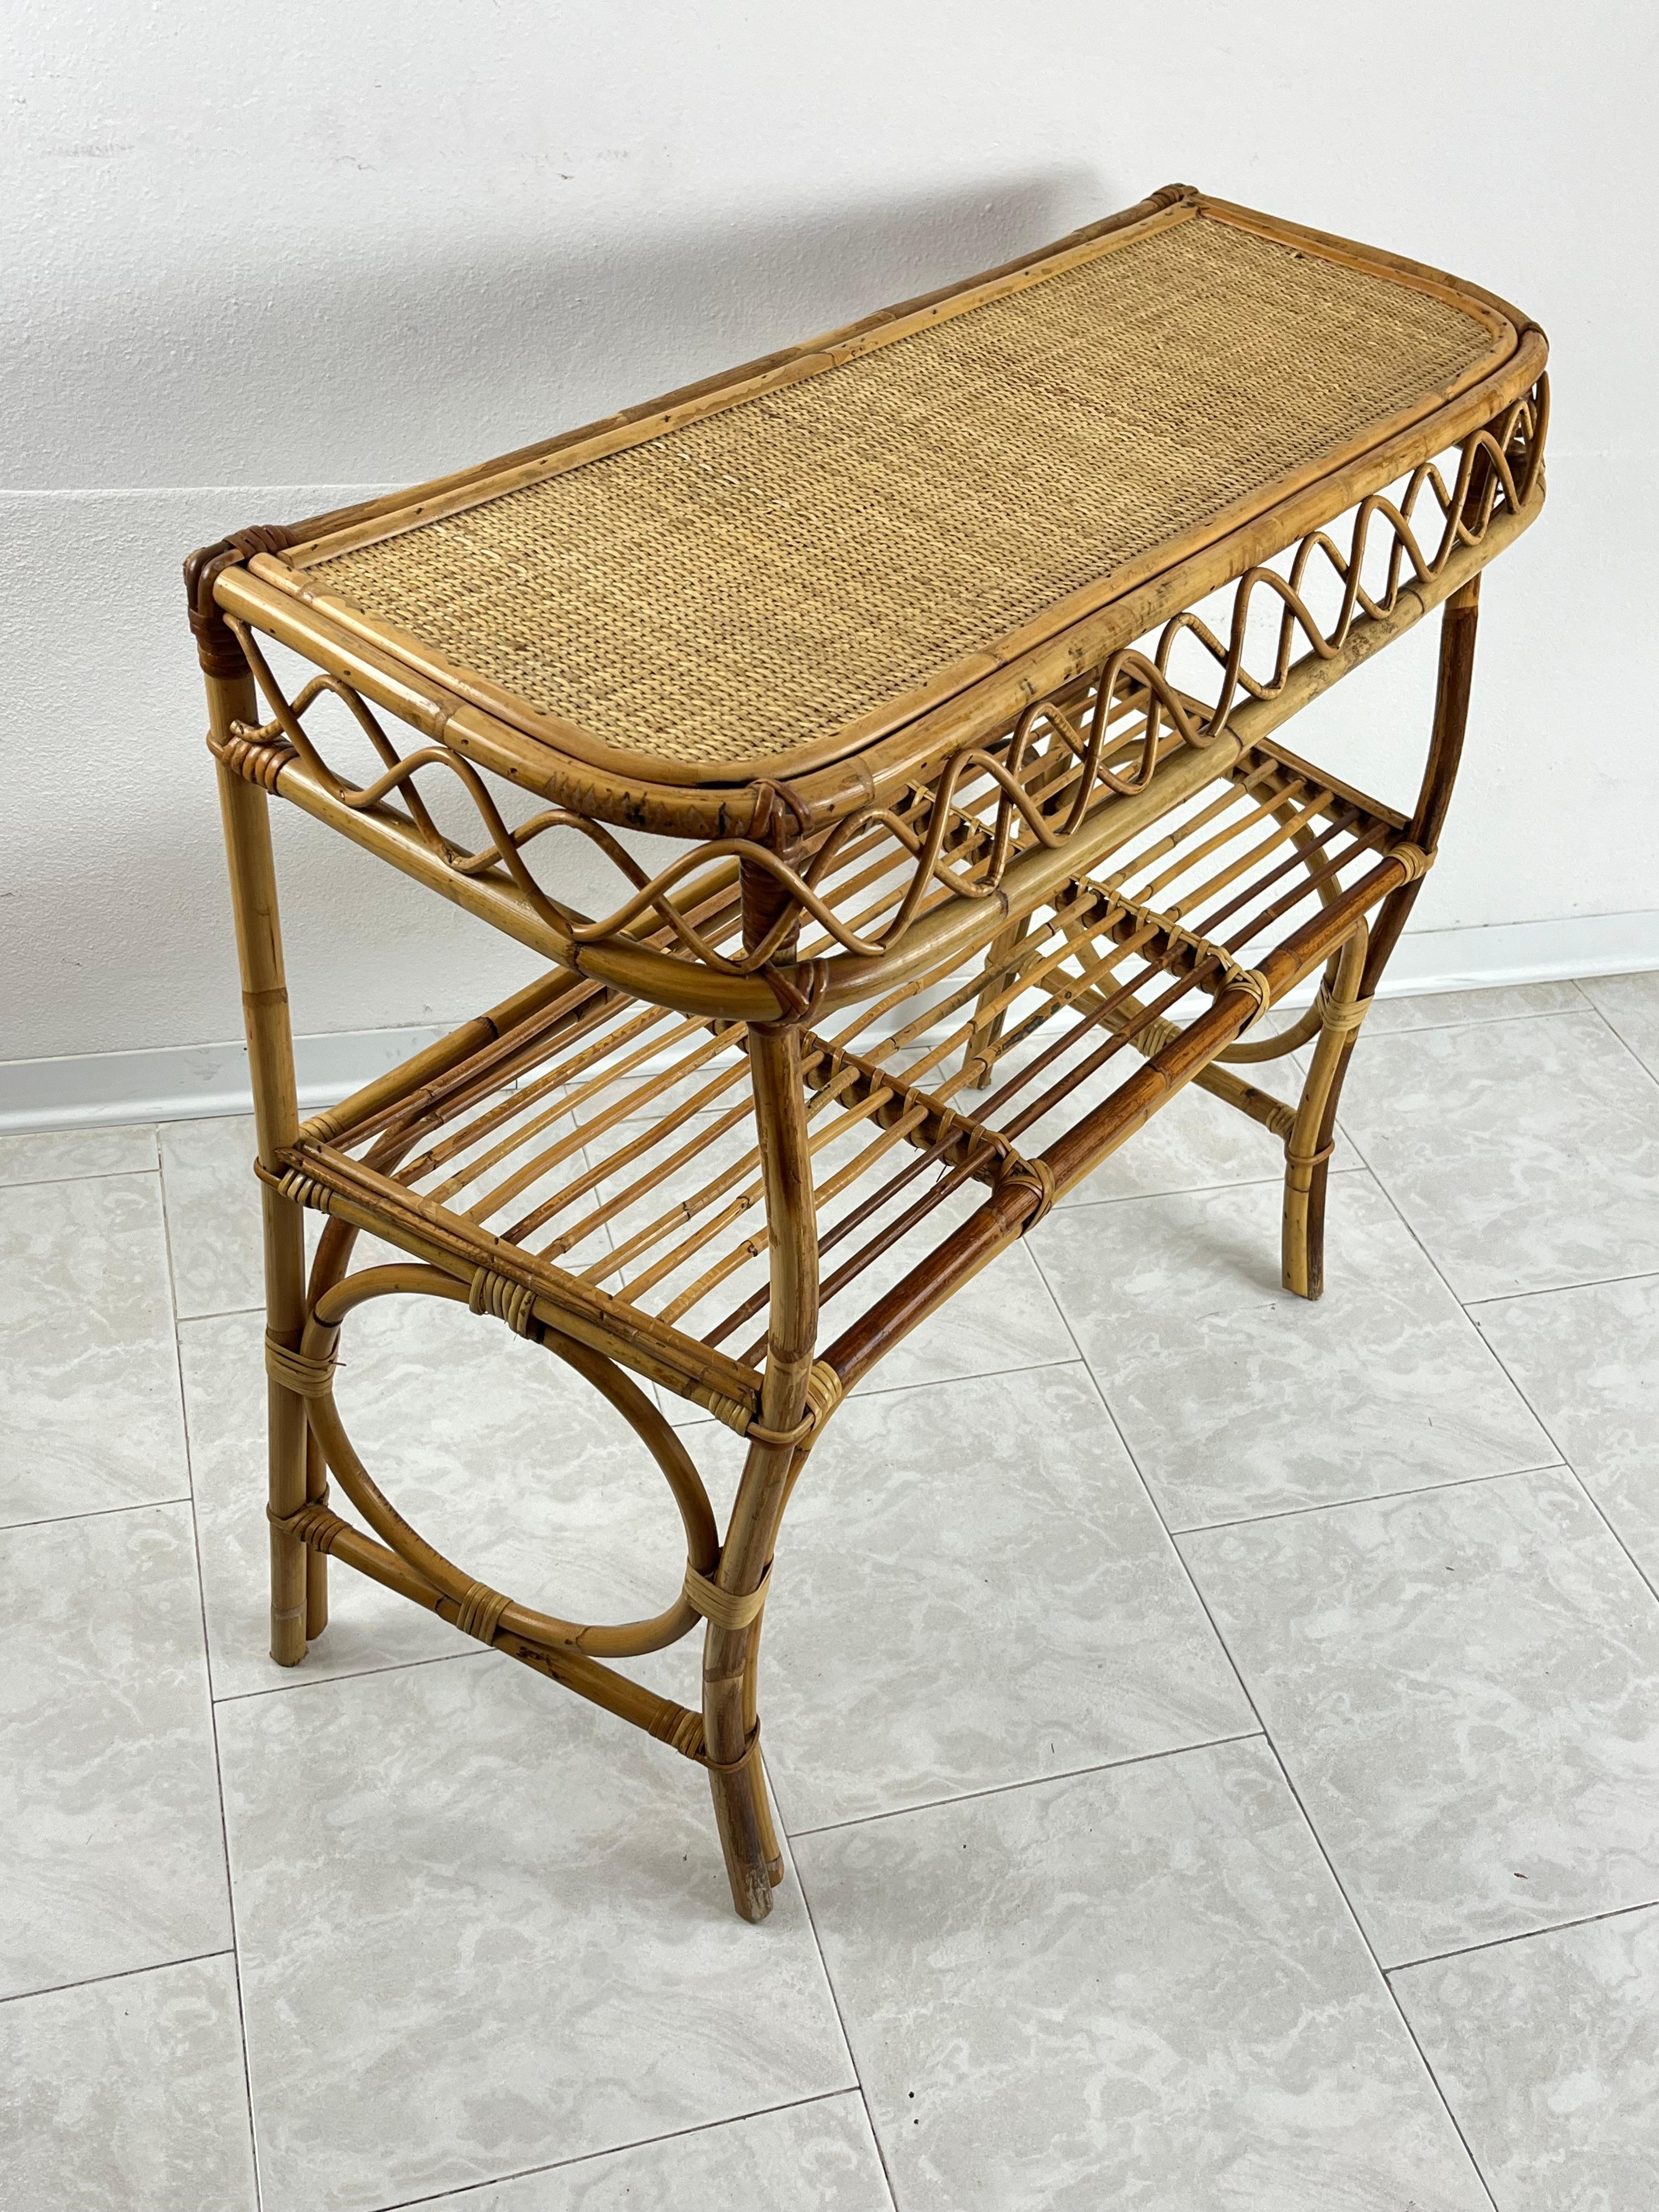 Italian Mid-Century Wicker and Bamboo Console Attributed to Franco Albini 1960s For Sale